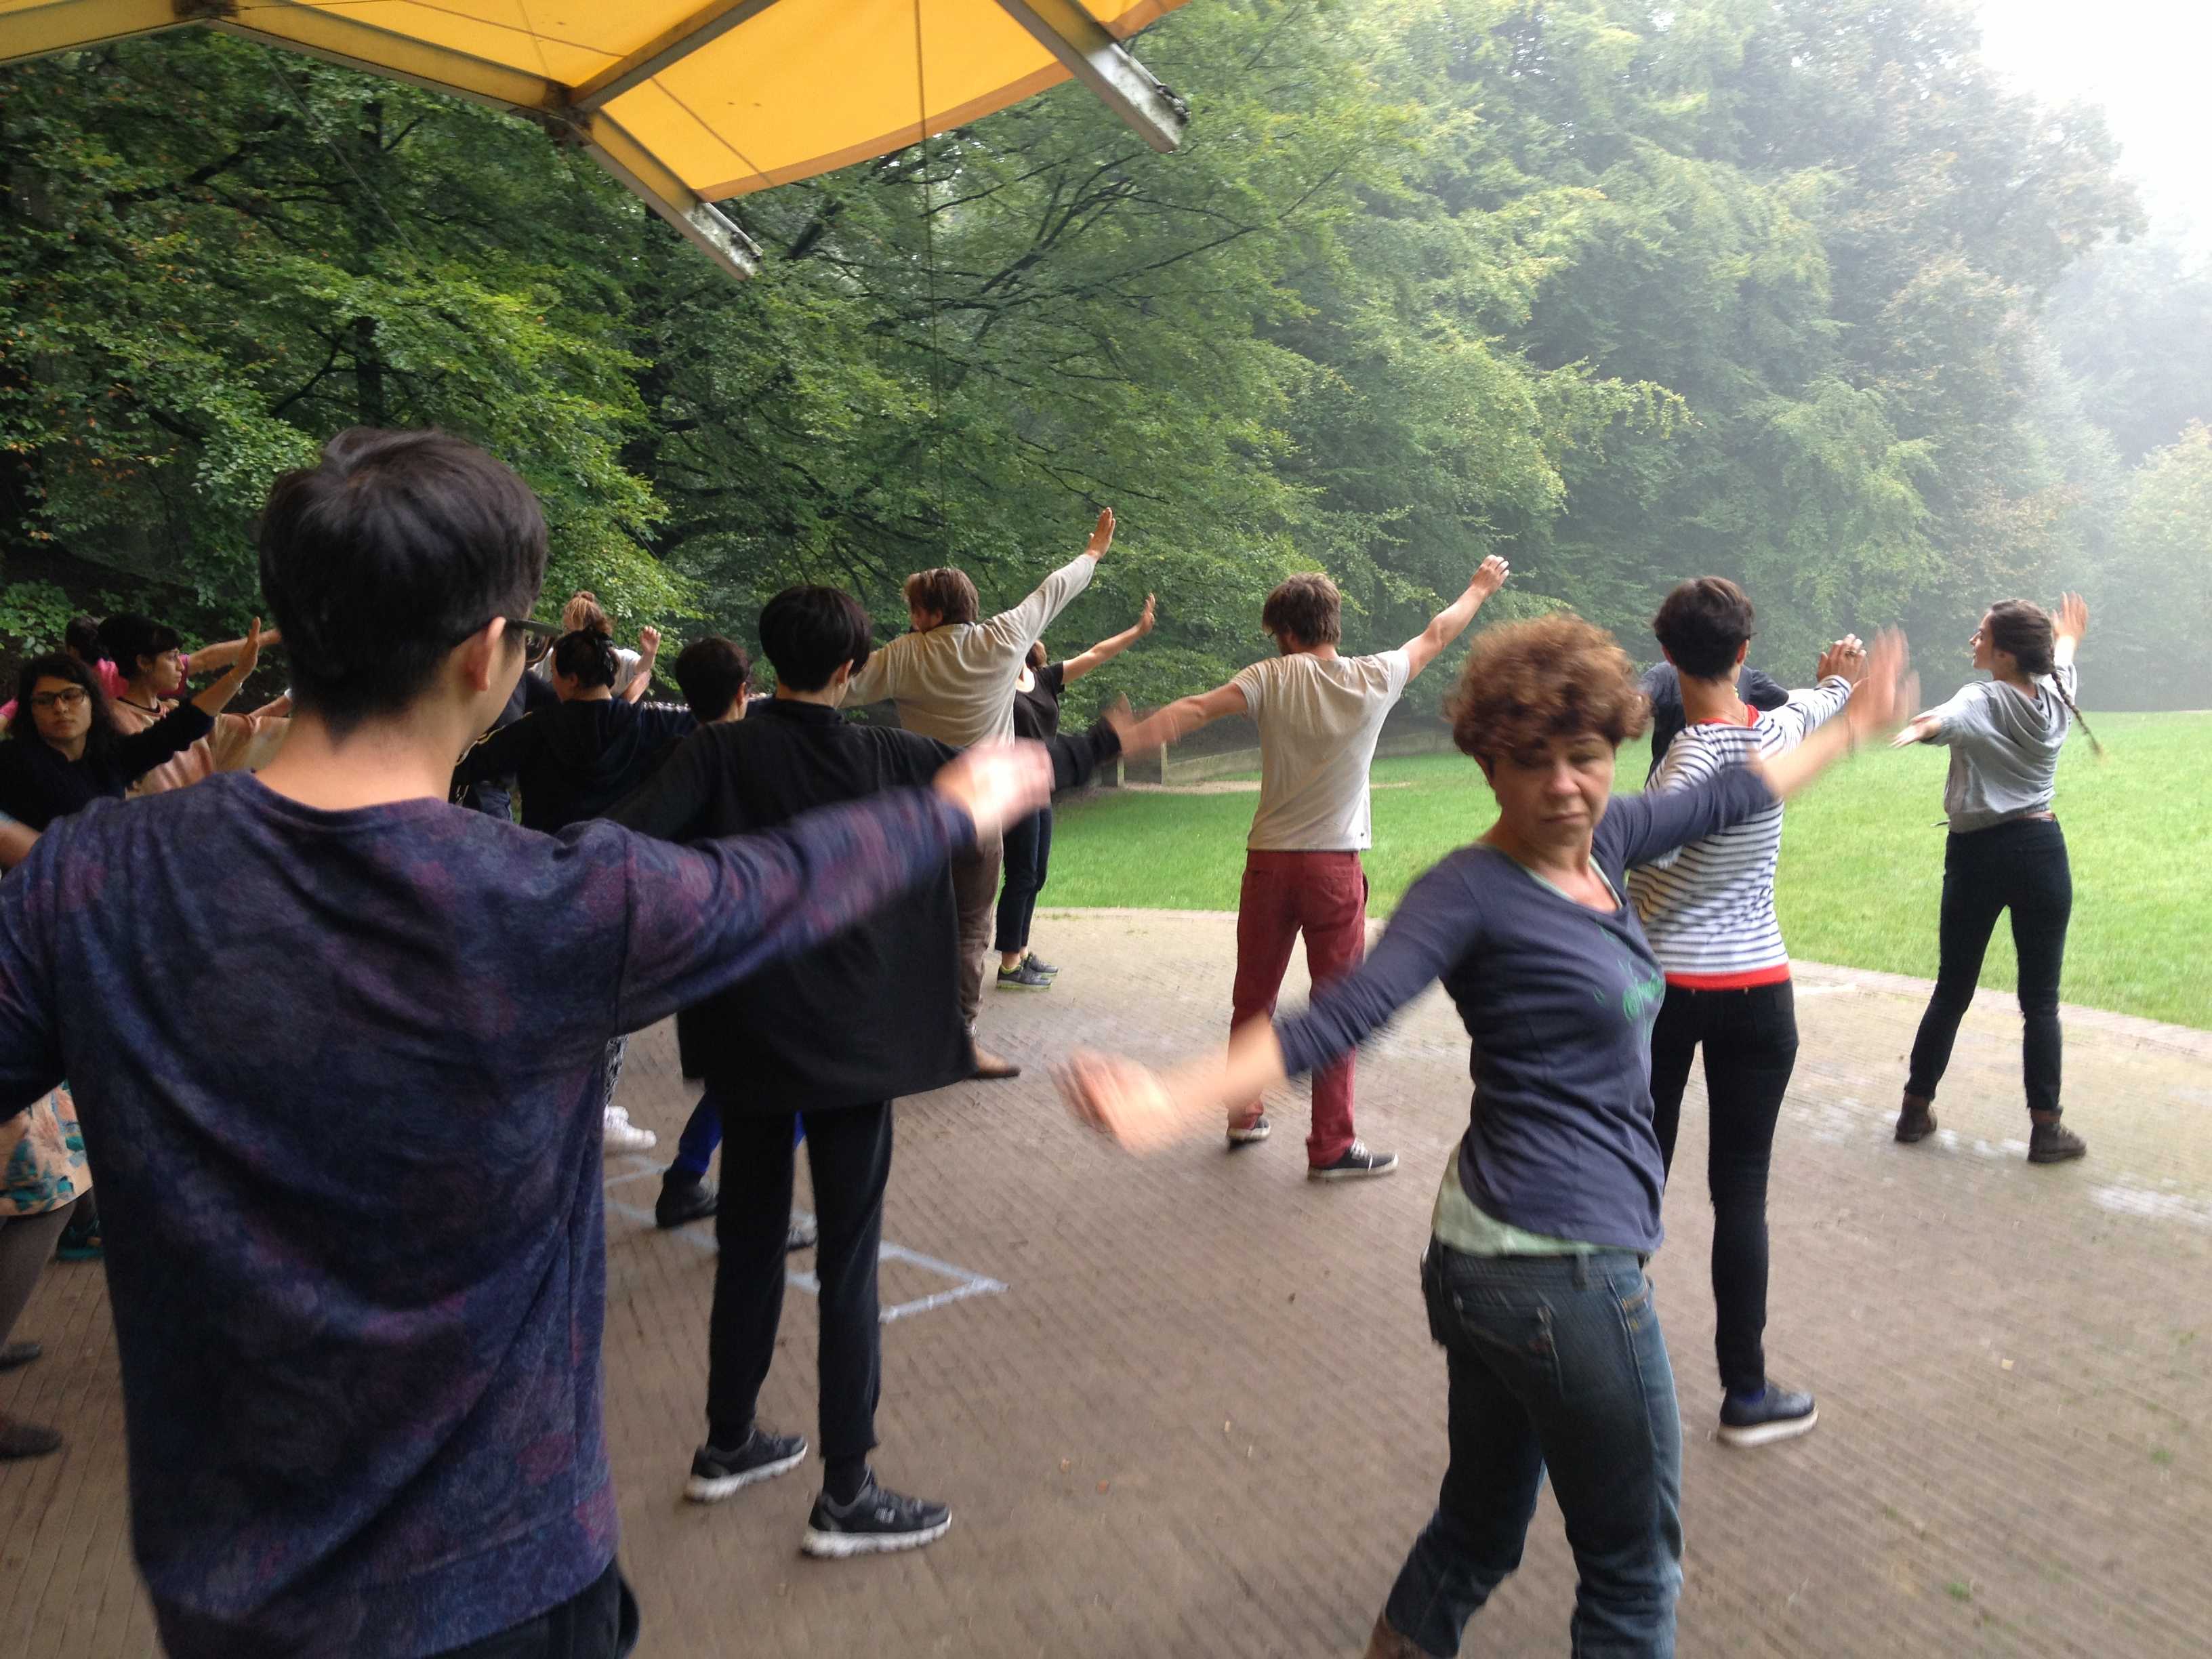 Sonsbeek Entr'acte during DAI's introduction week 2014: Tai-chi session in the Sonsbeek park 